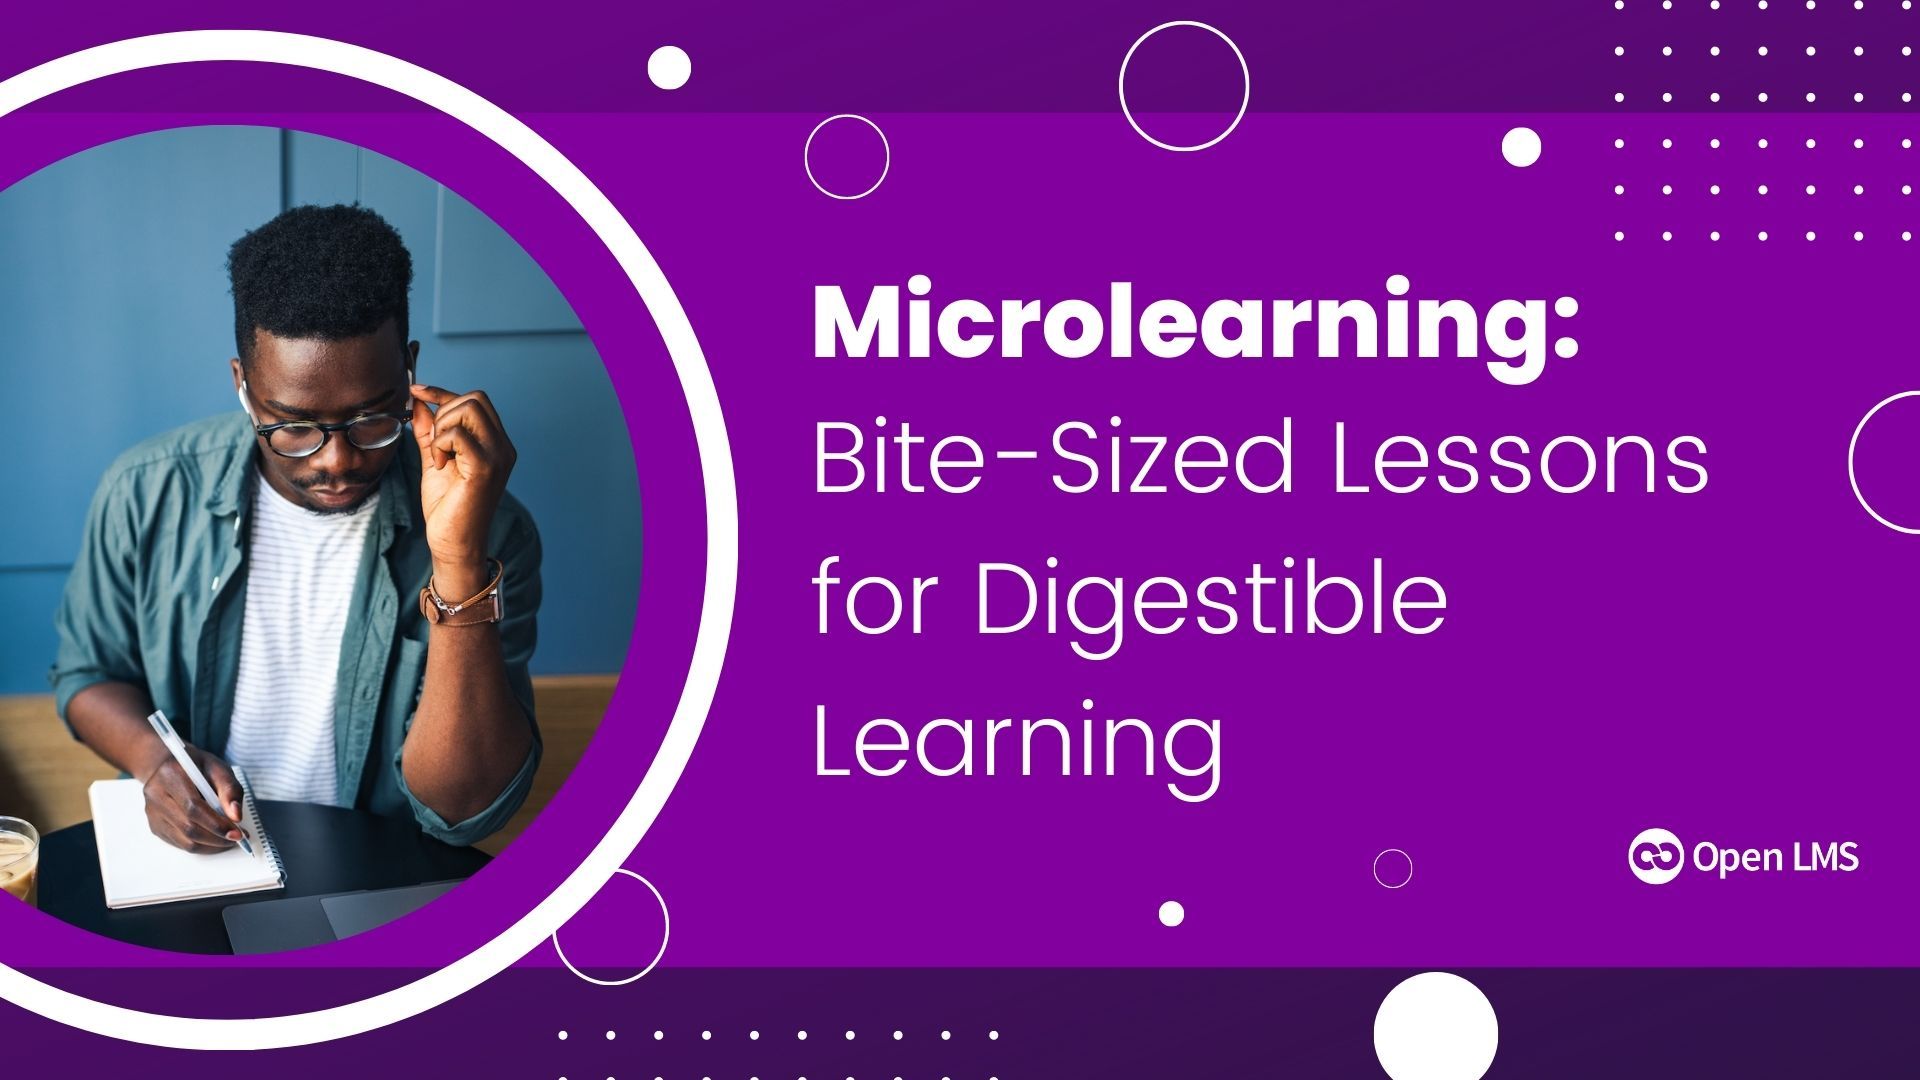 Microlearning: Bite-Sized Lessons for Digestible Learning